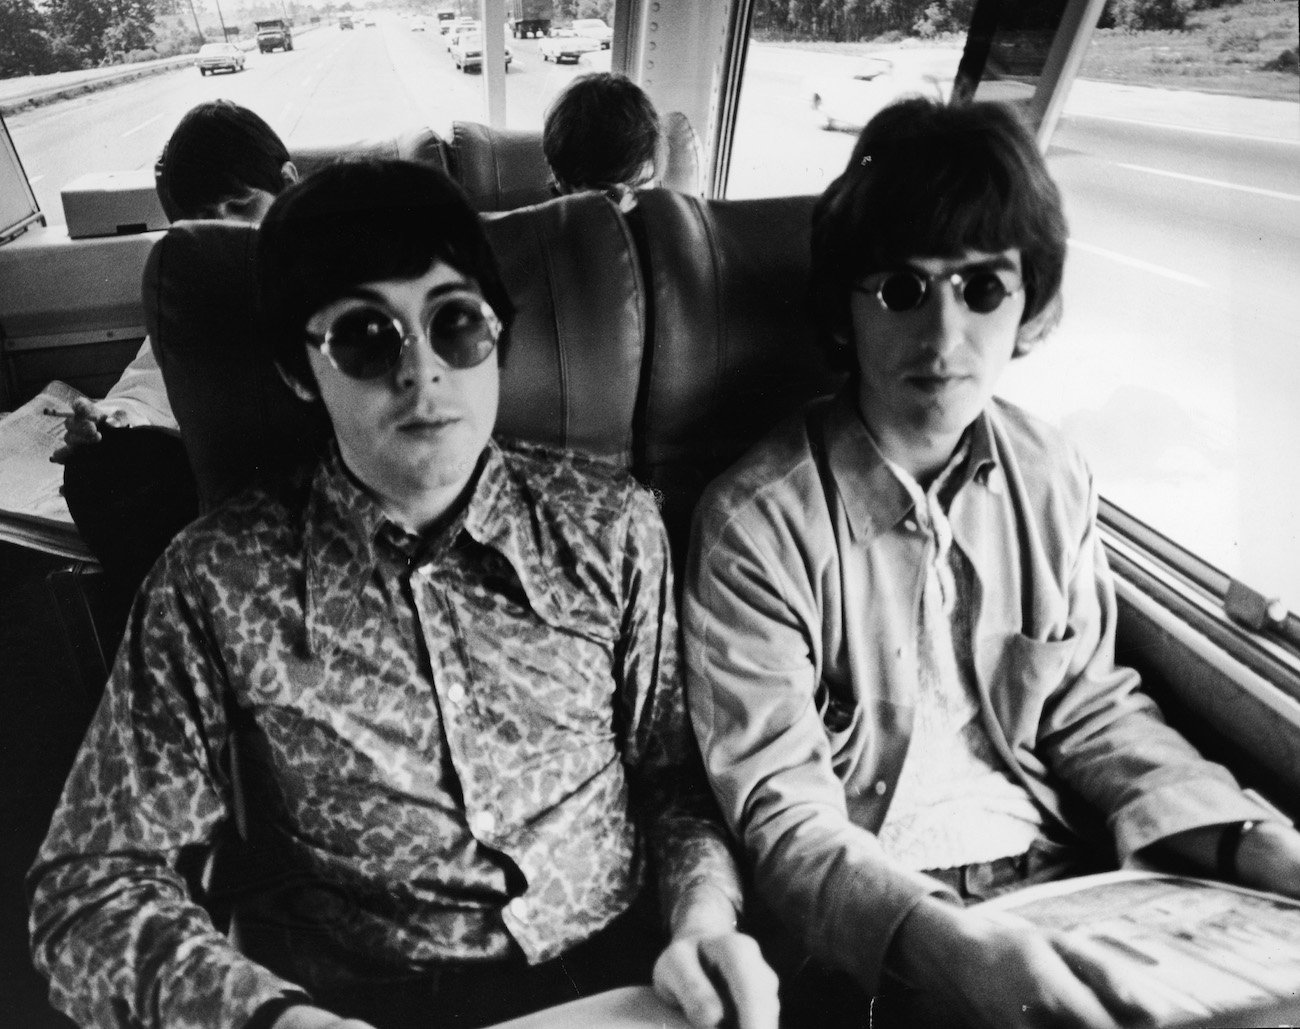 Paul McCartney and George Harrison on a tour bus in the mid-1960s.